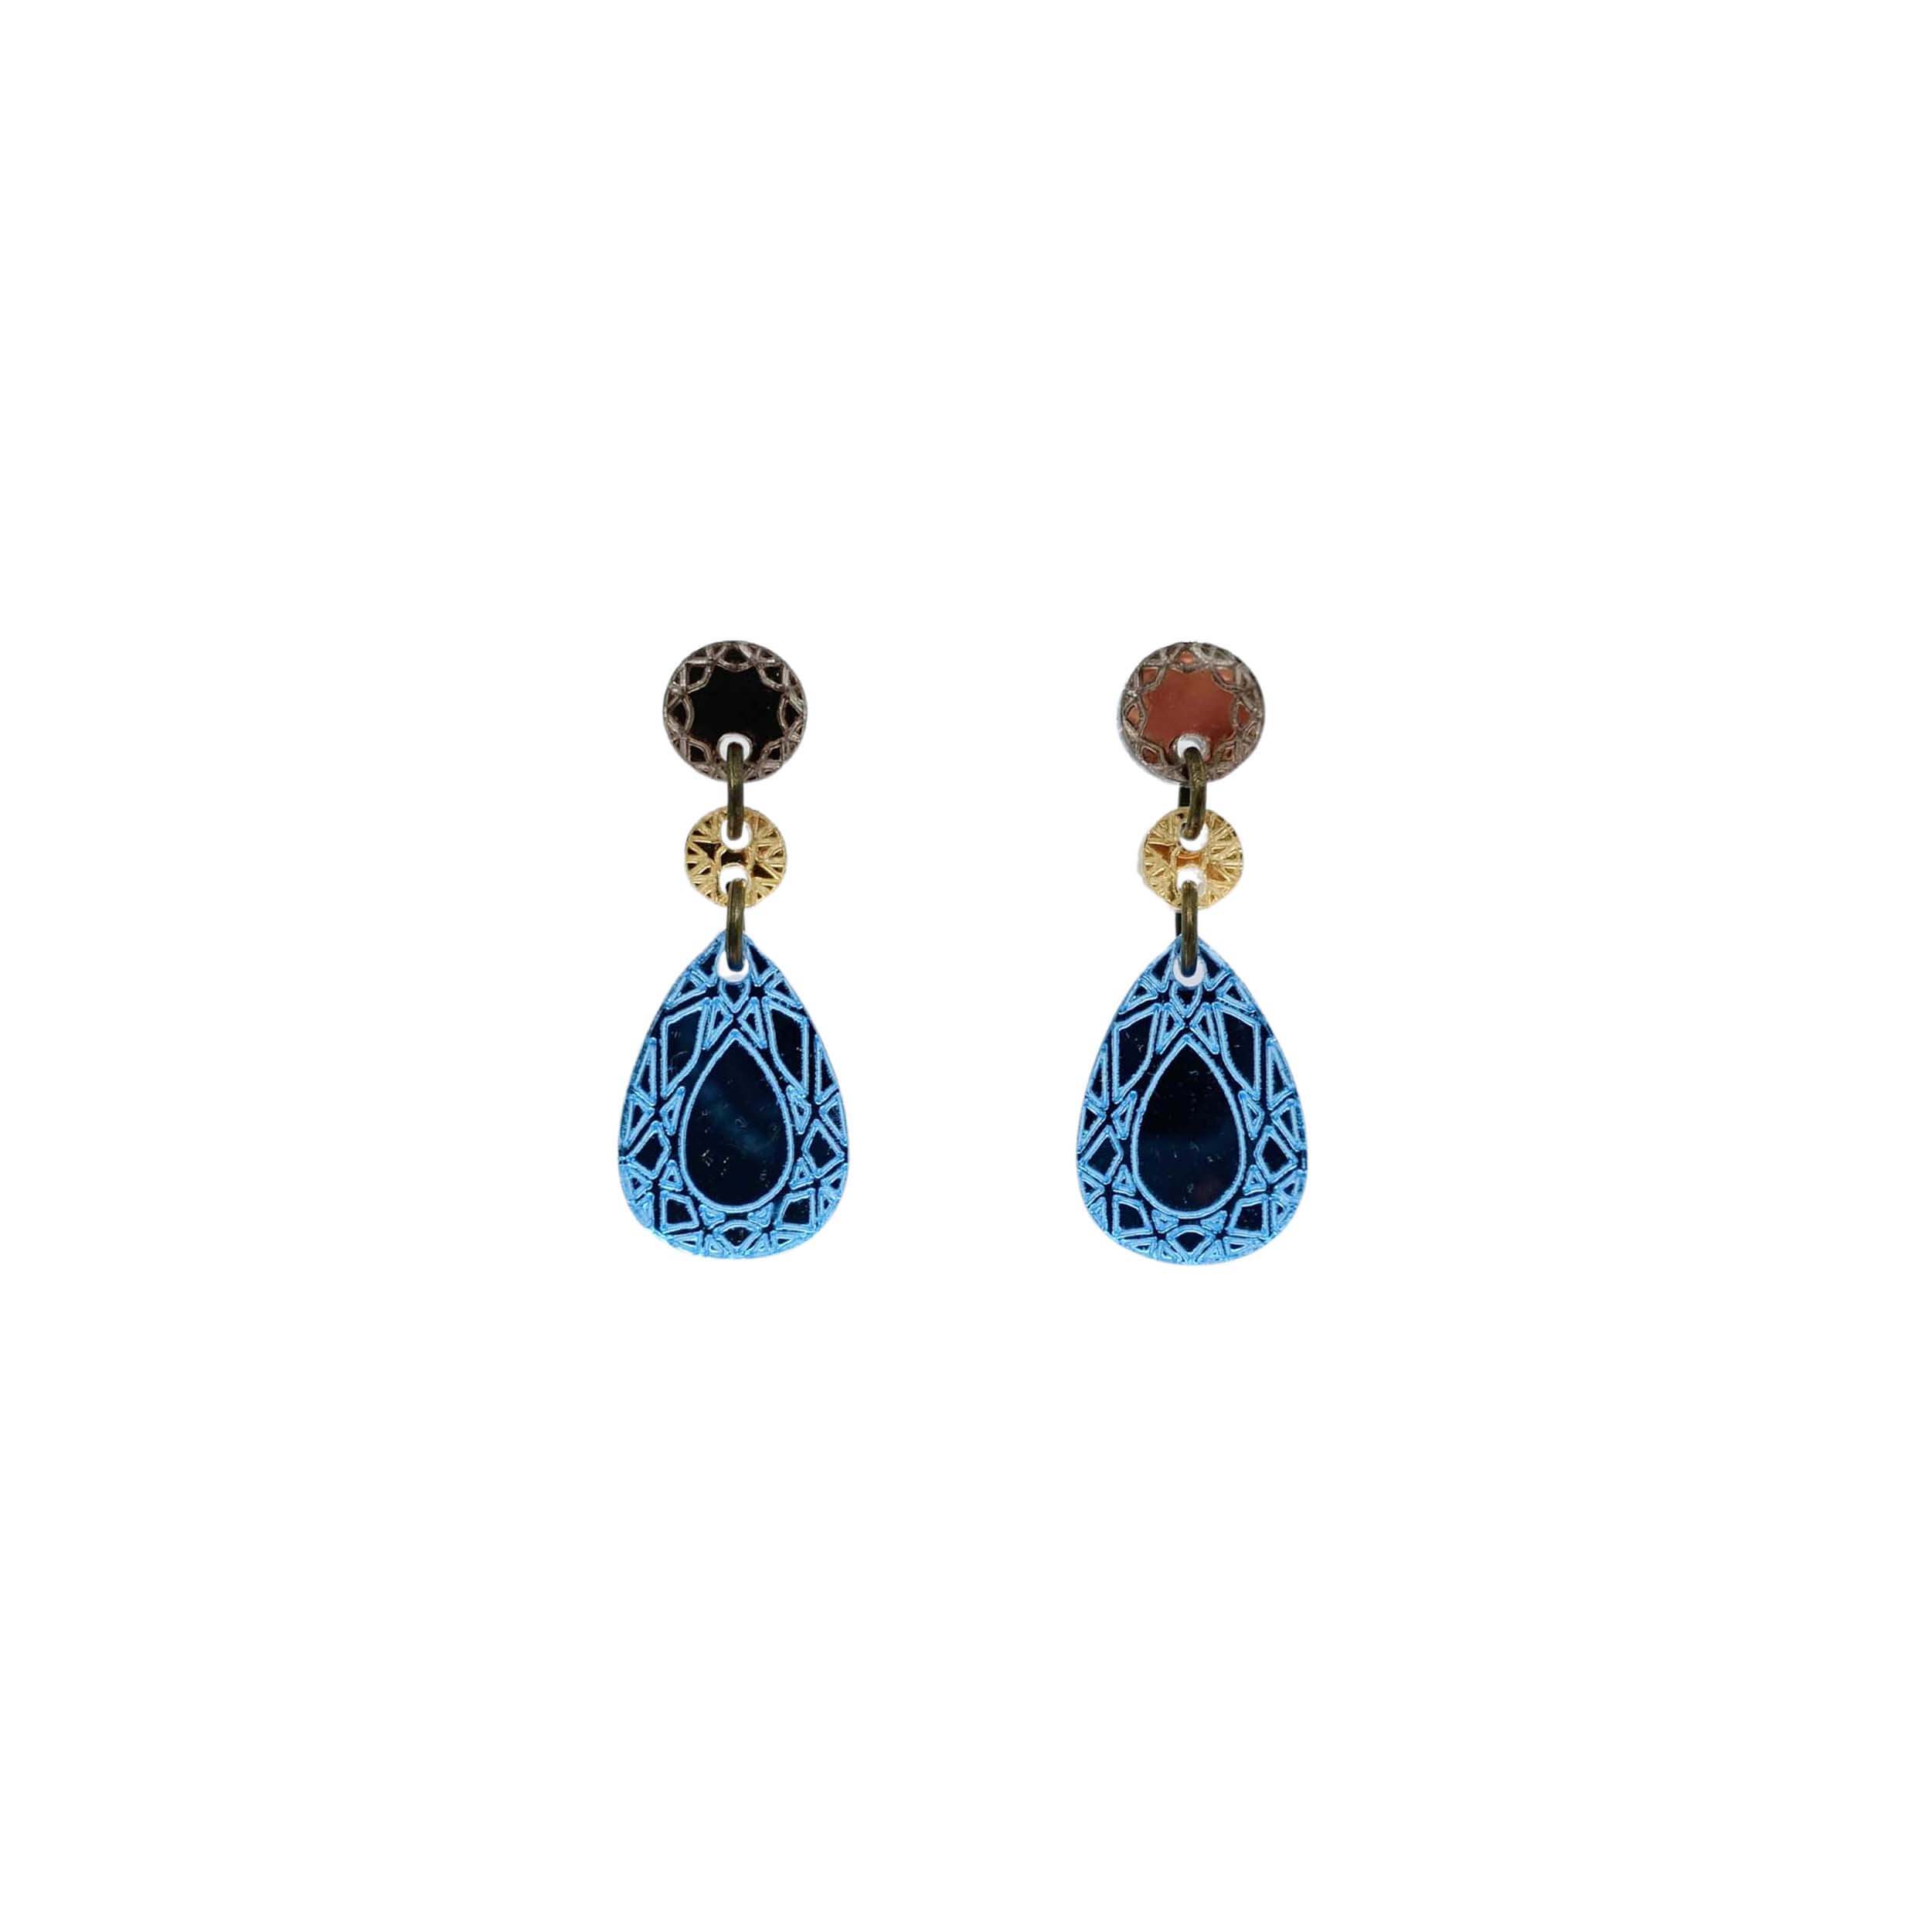 Belle Époque french drop earrings in sky blue mirror. These earrings are part of the Austerity Jewels Paris-inspired collection designed by Sarah Day for Wear and Resist. 